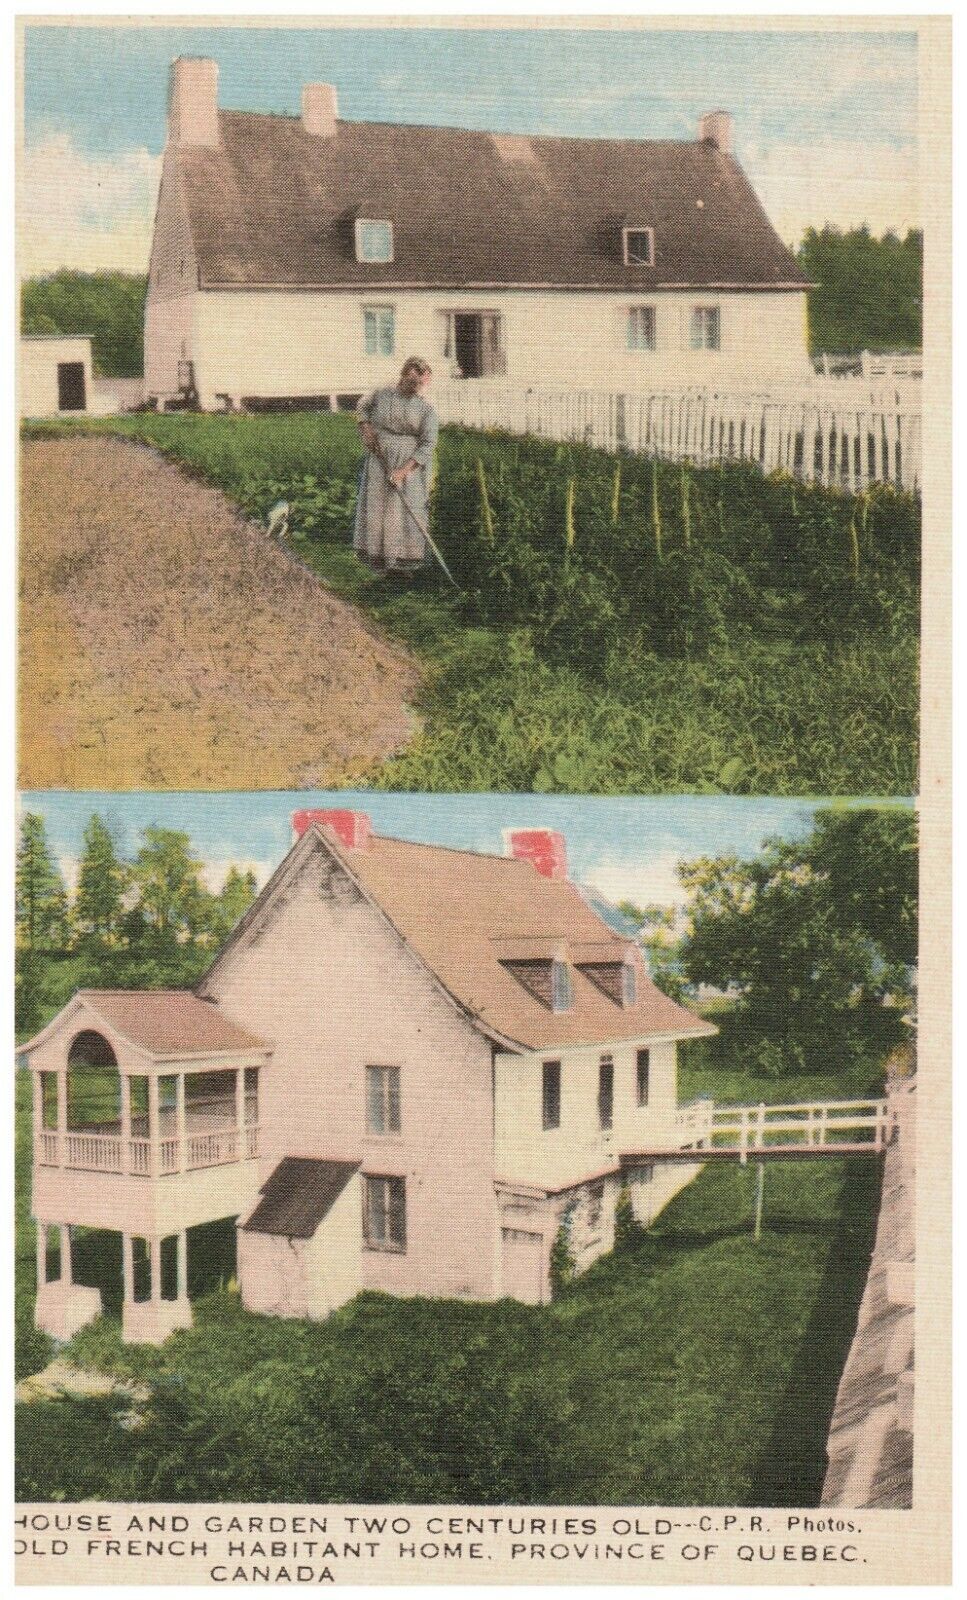 Old French Habitant Home House Garden 2 Centuries CPR Quebec Canada Postcard